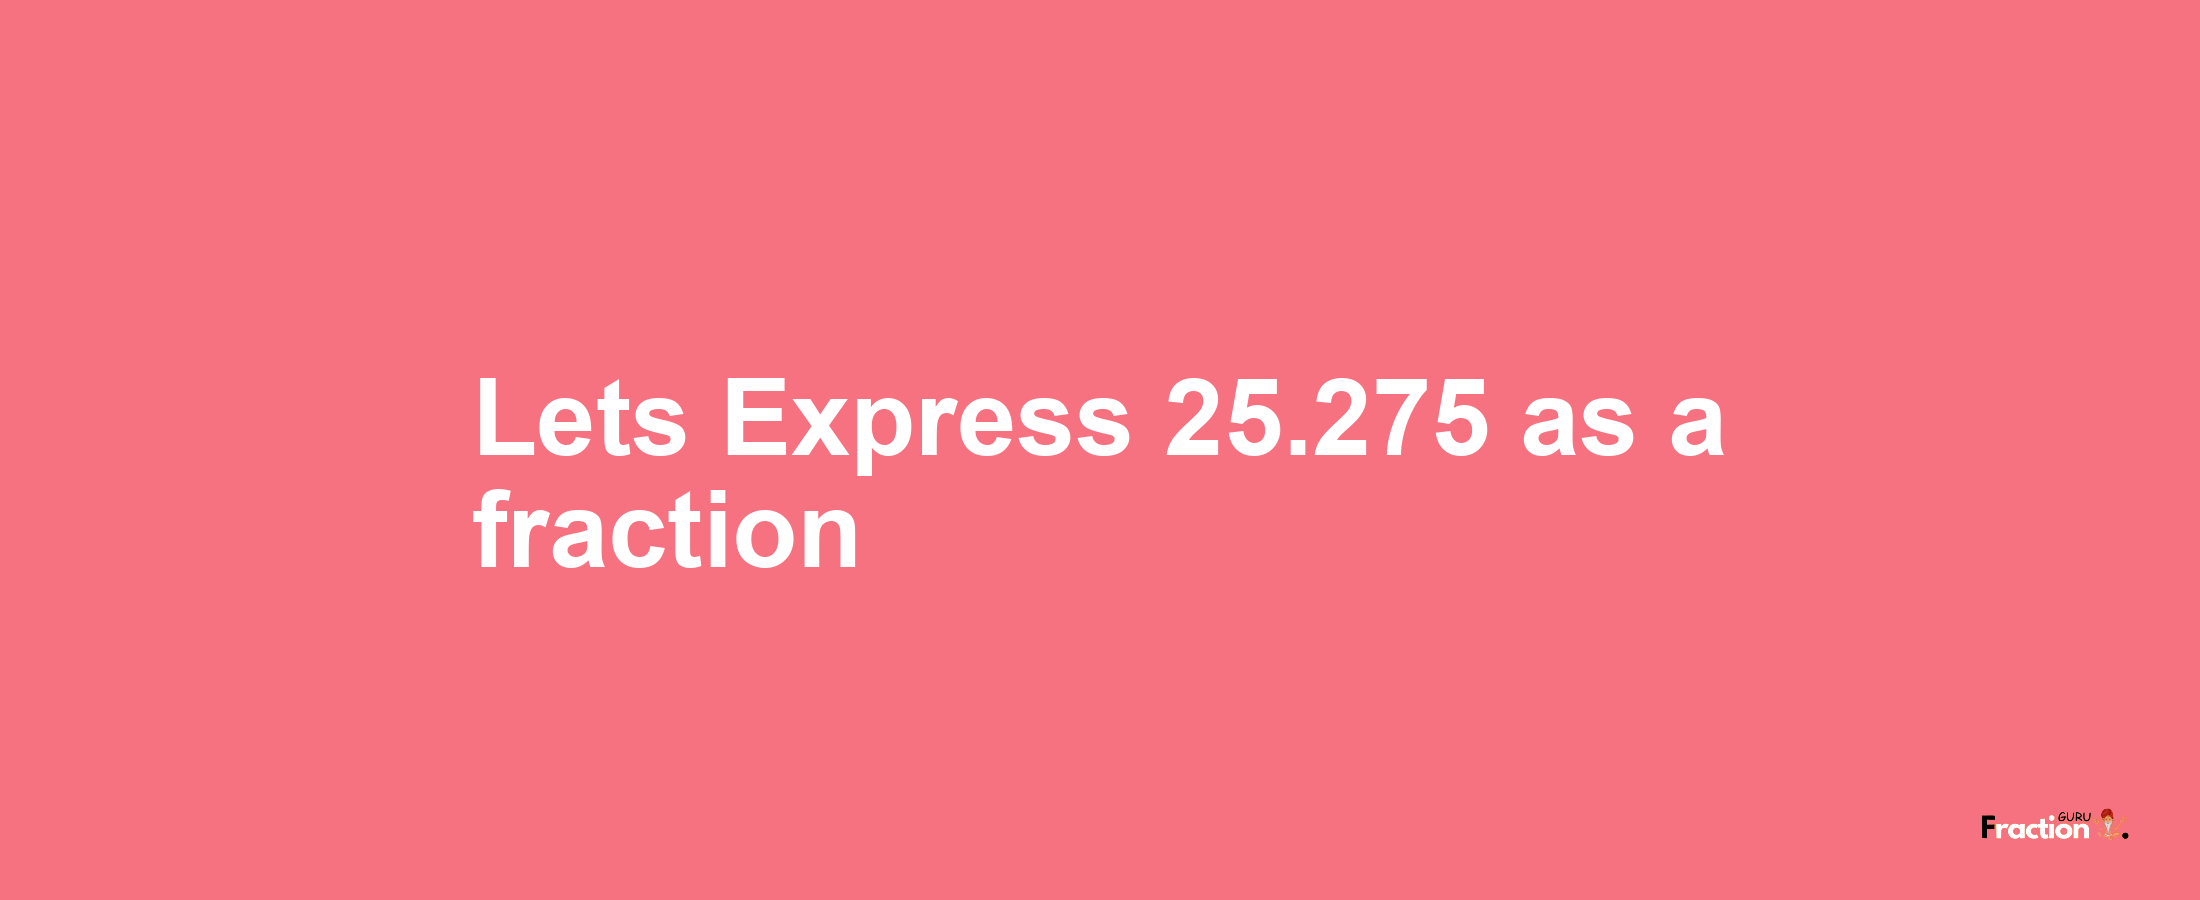 Lets Express 25.275 as afraction